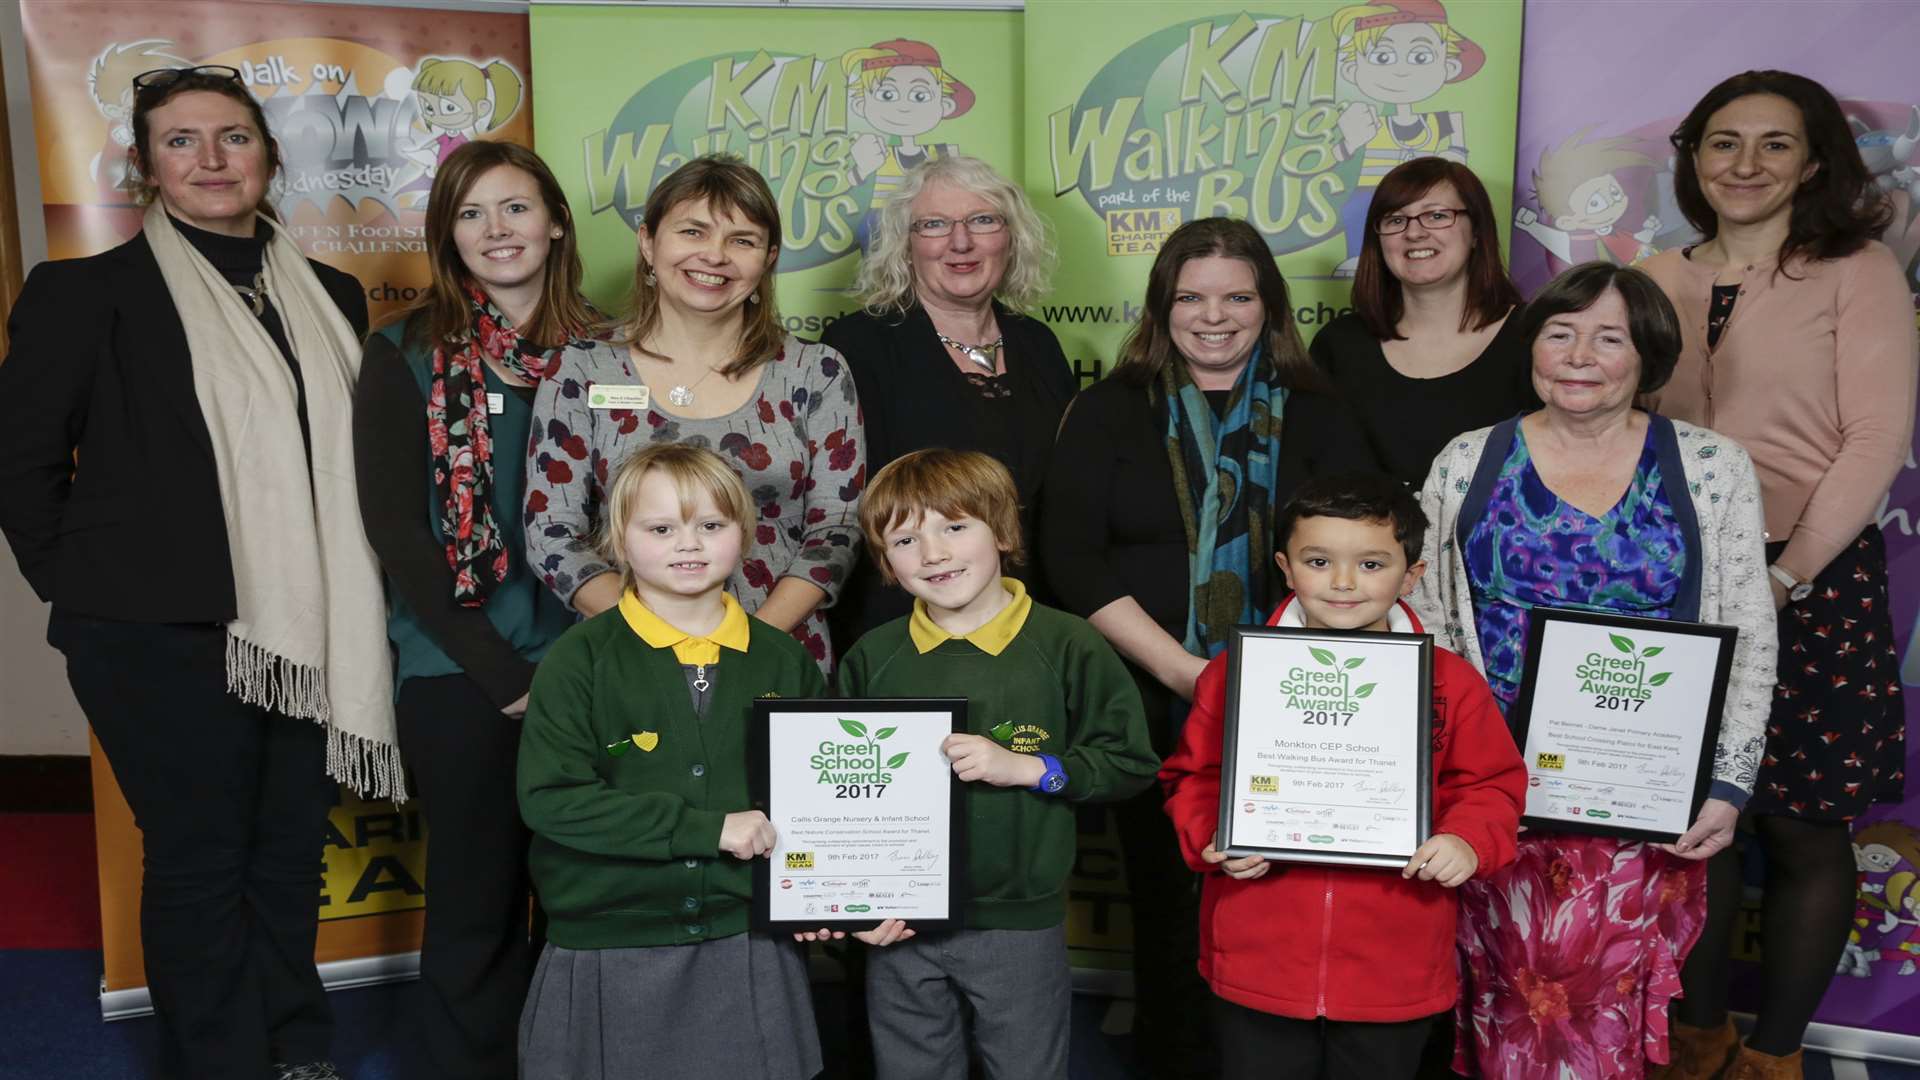 Winners of the 2017 awards included Pat Bennett of Dame Janet Primary Academy (Best School Crossing Patrol), Monkton CEP School (Best Walking Bus), and Callis Grange Nursery and Infant School (Best Primary School Nature Conservation.